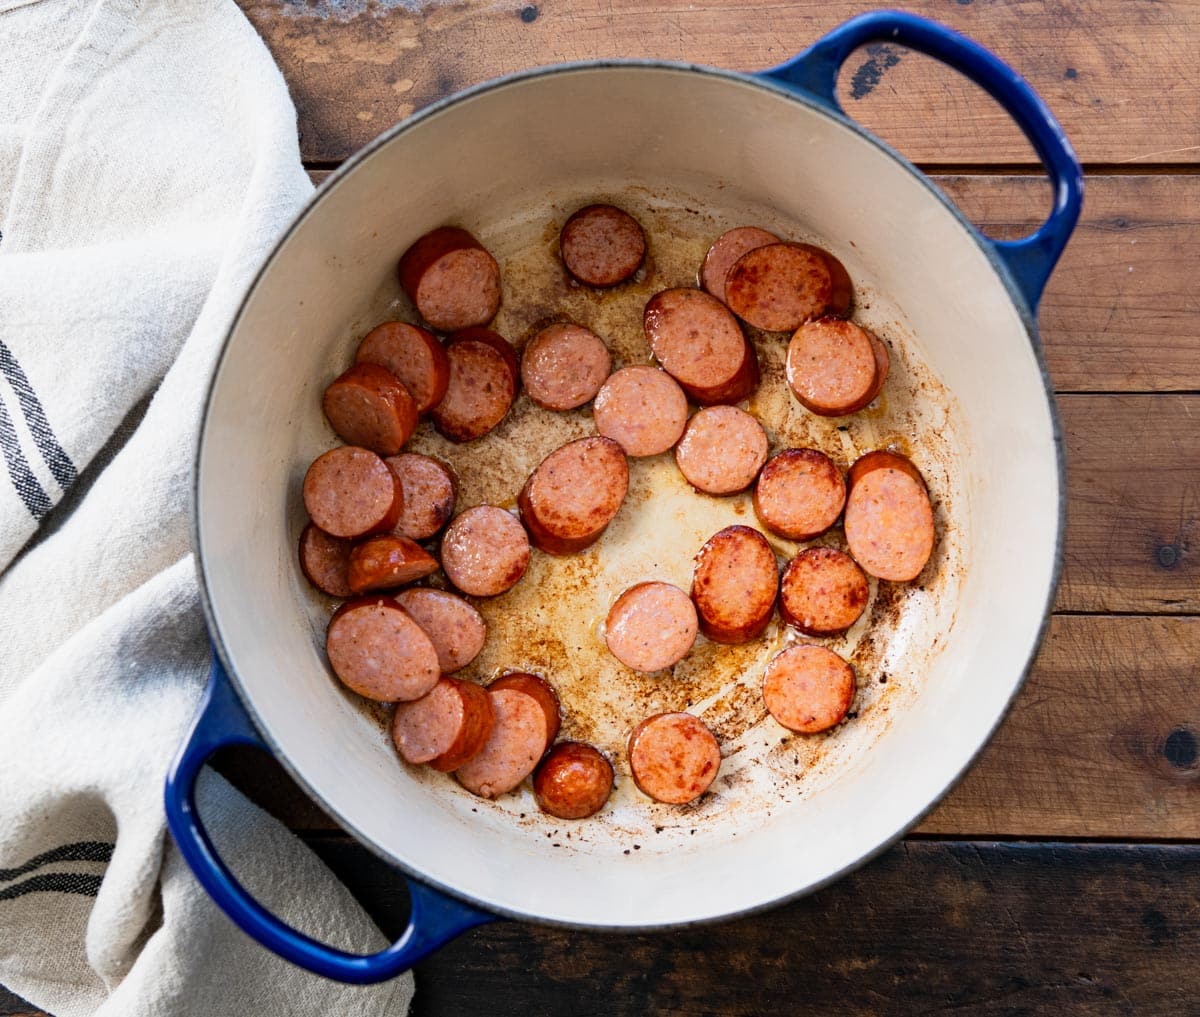 Browning andouille sausage in a pot.